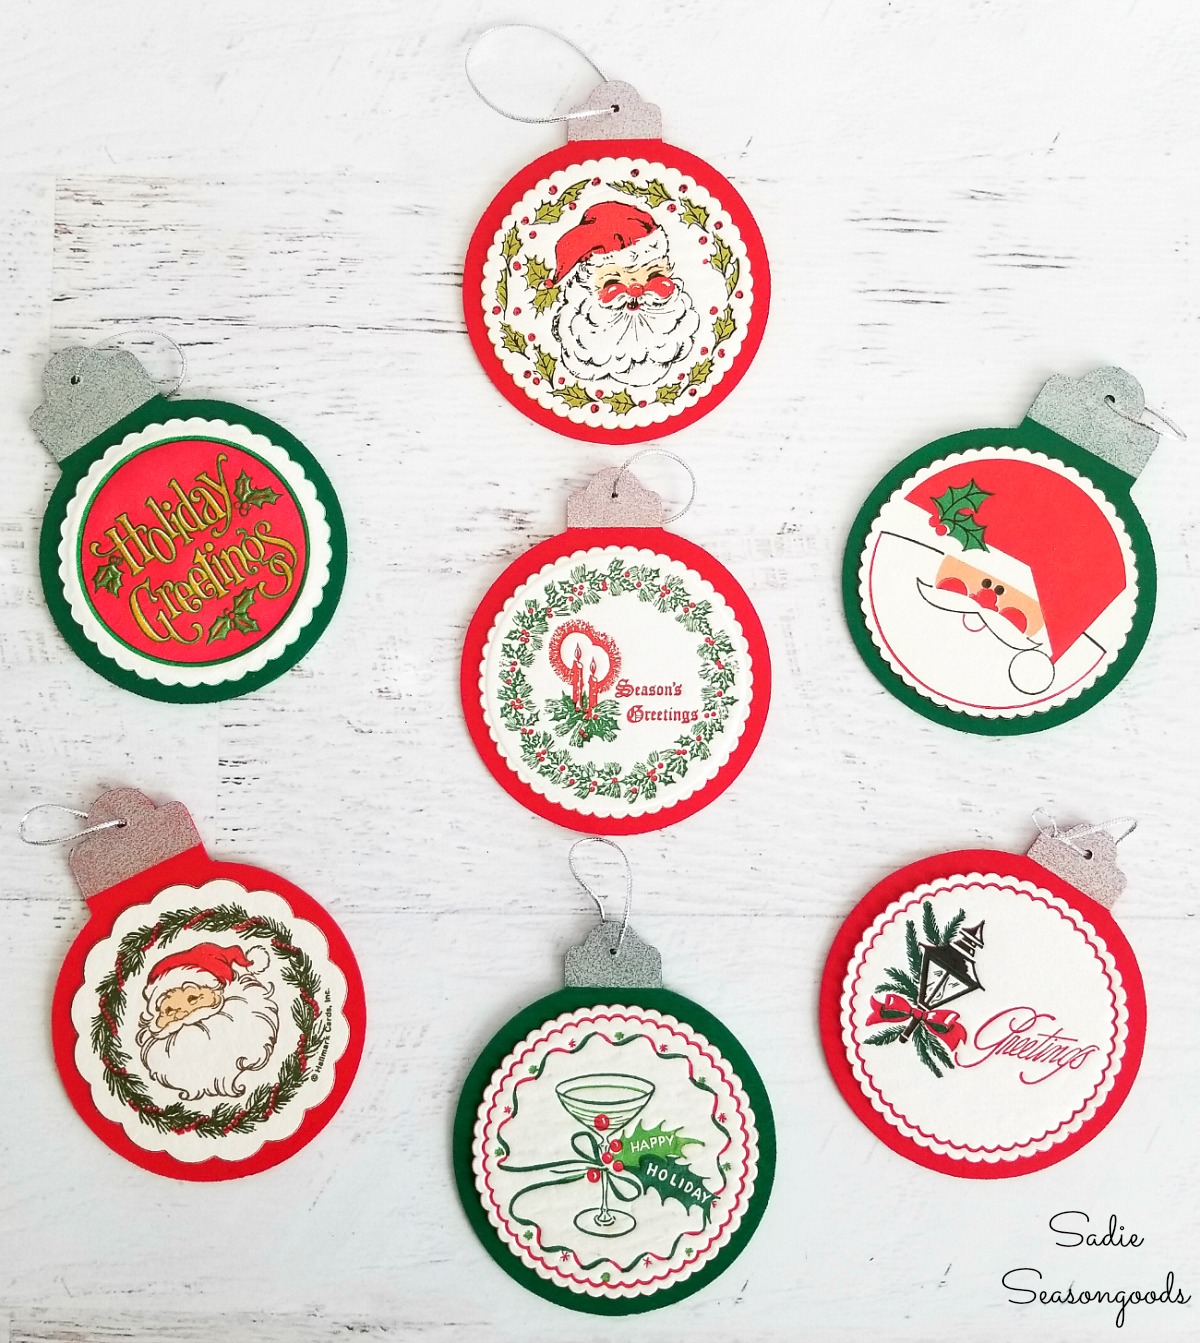 Retro Christmas Ornaments with paper coasters that have been decoupaged on wood cutouts